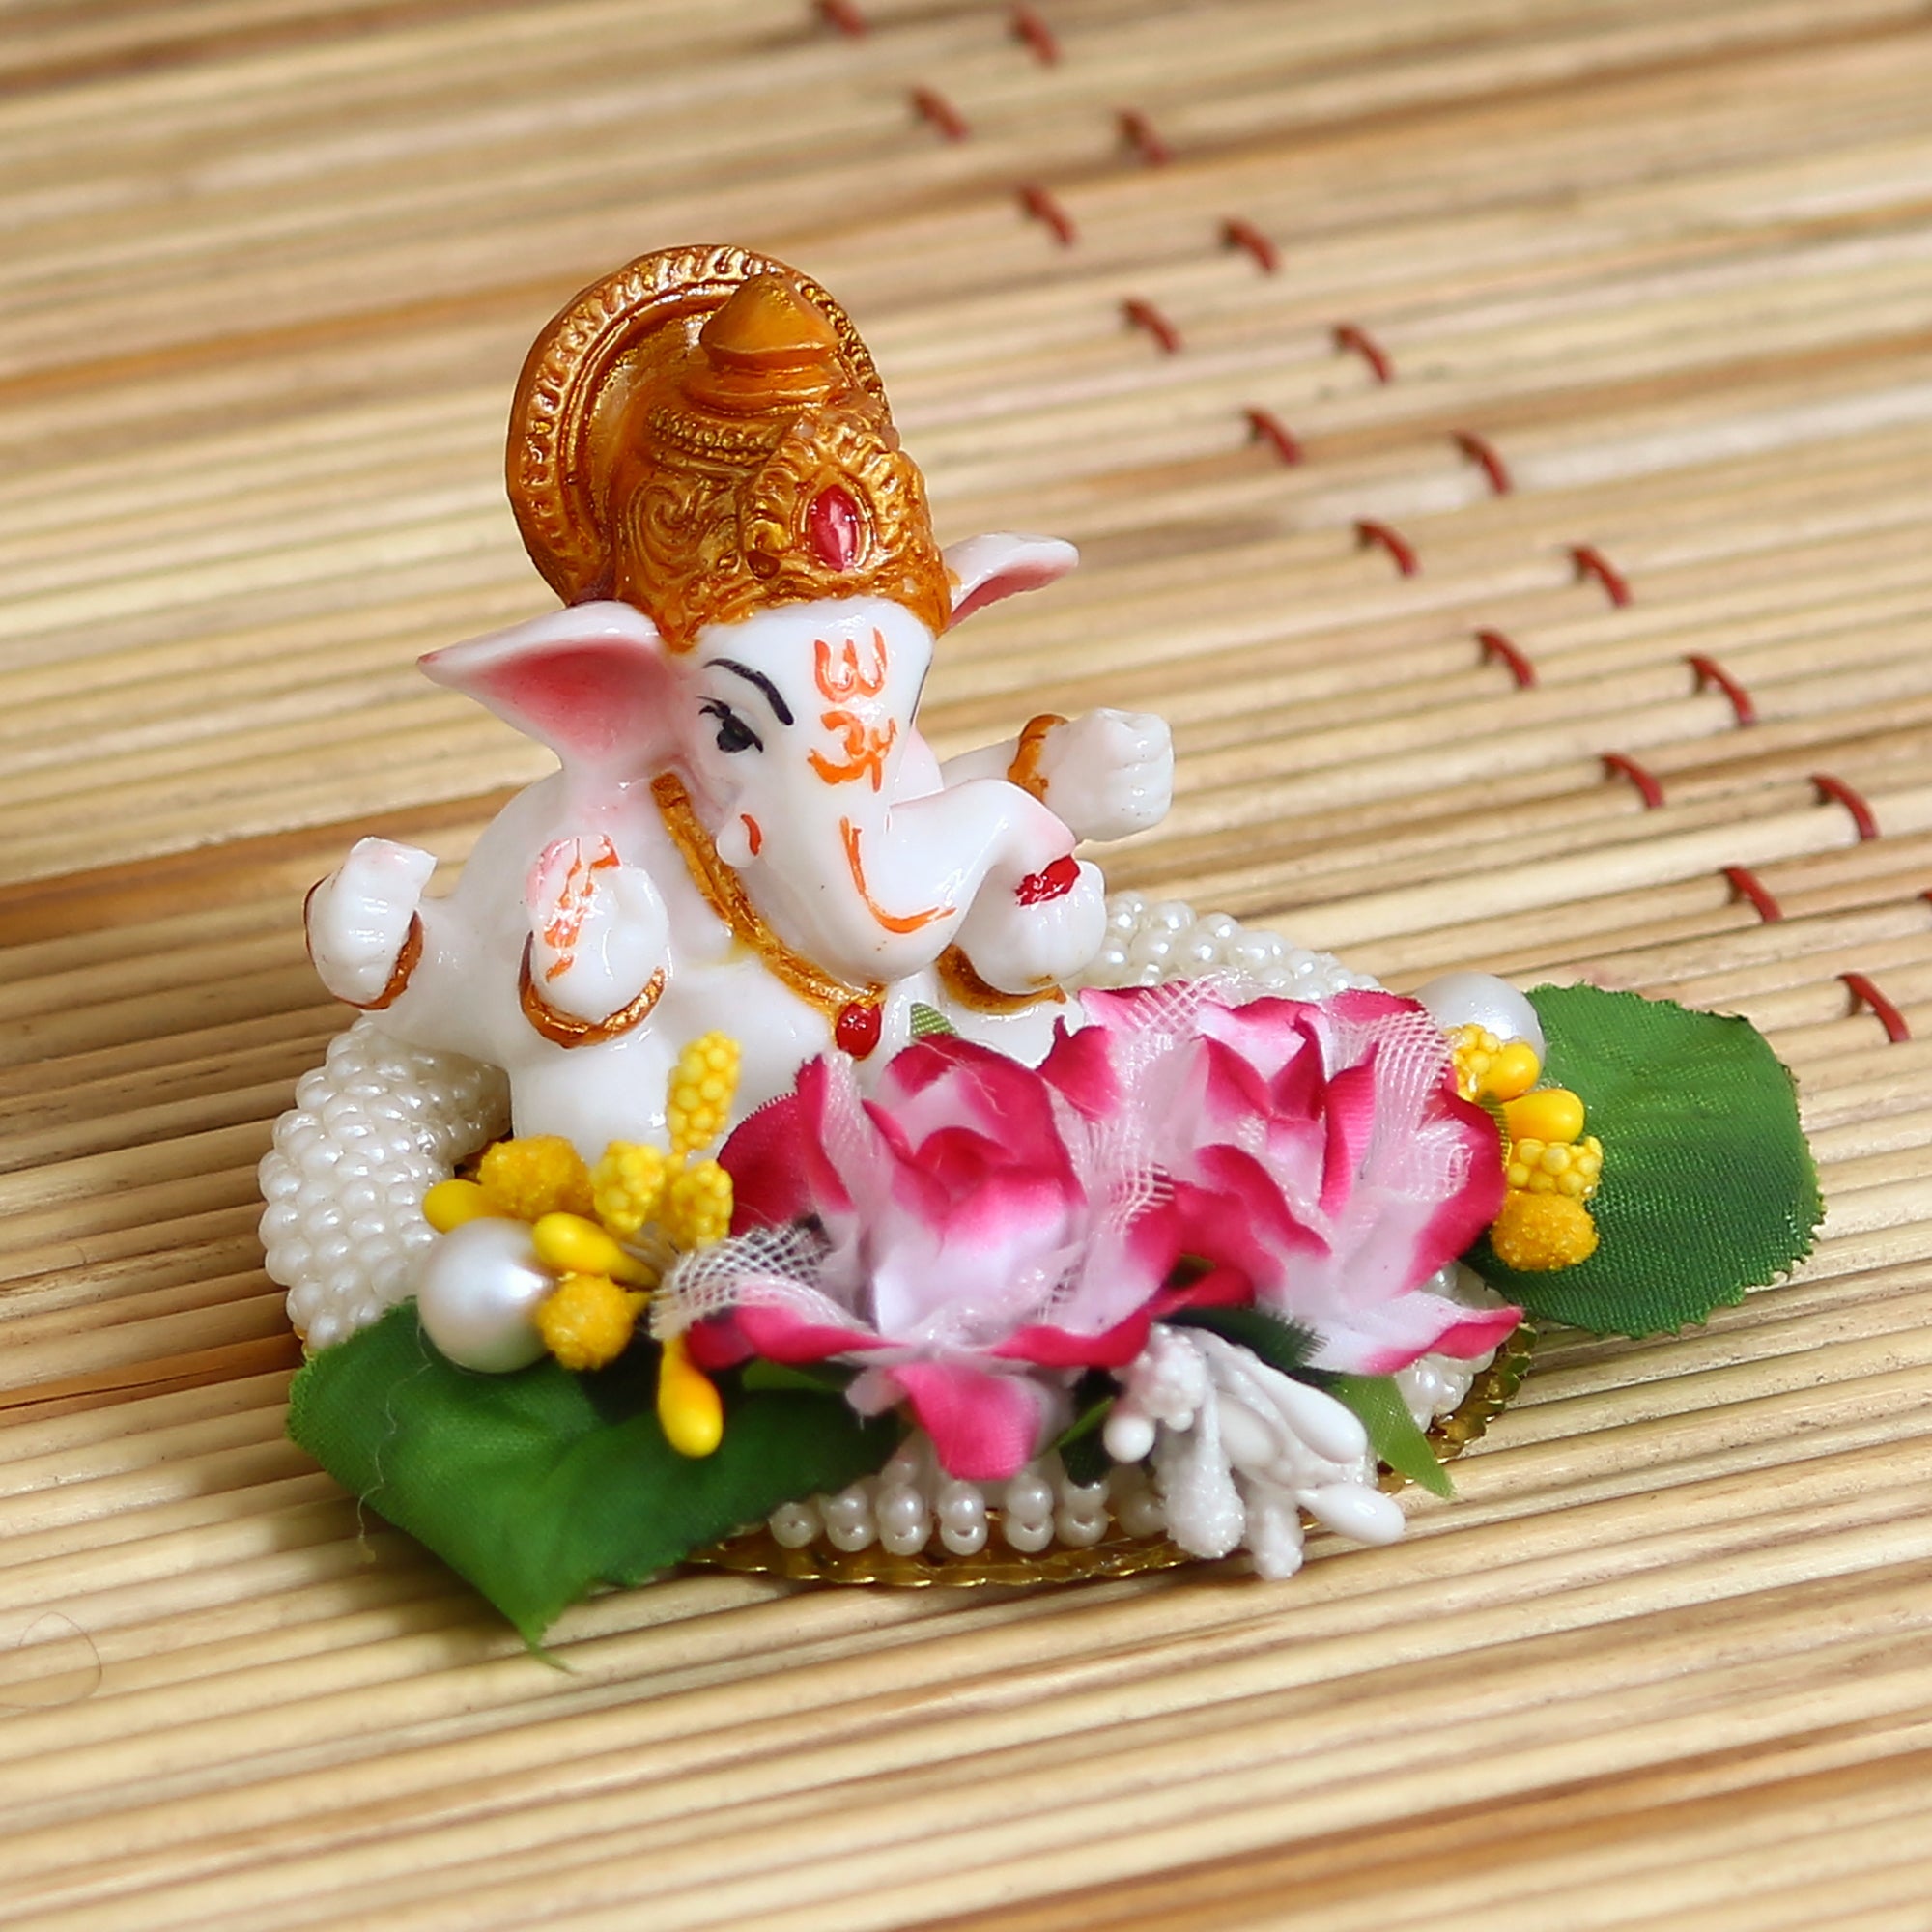 Lord Ganesha Idol on Decorative Handcrafted Plate with Colorful Flowers and Leaf 1